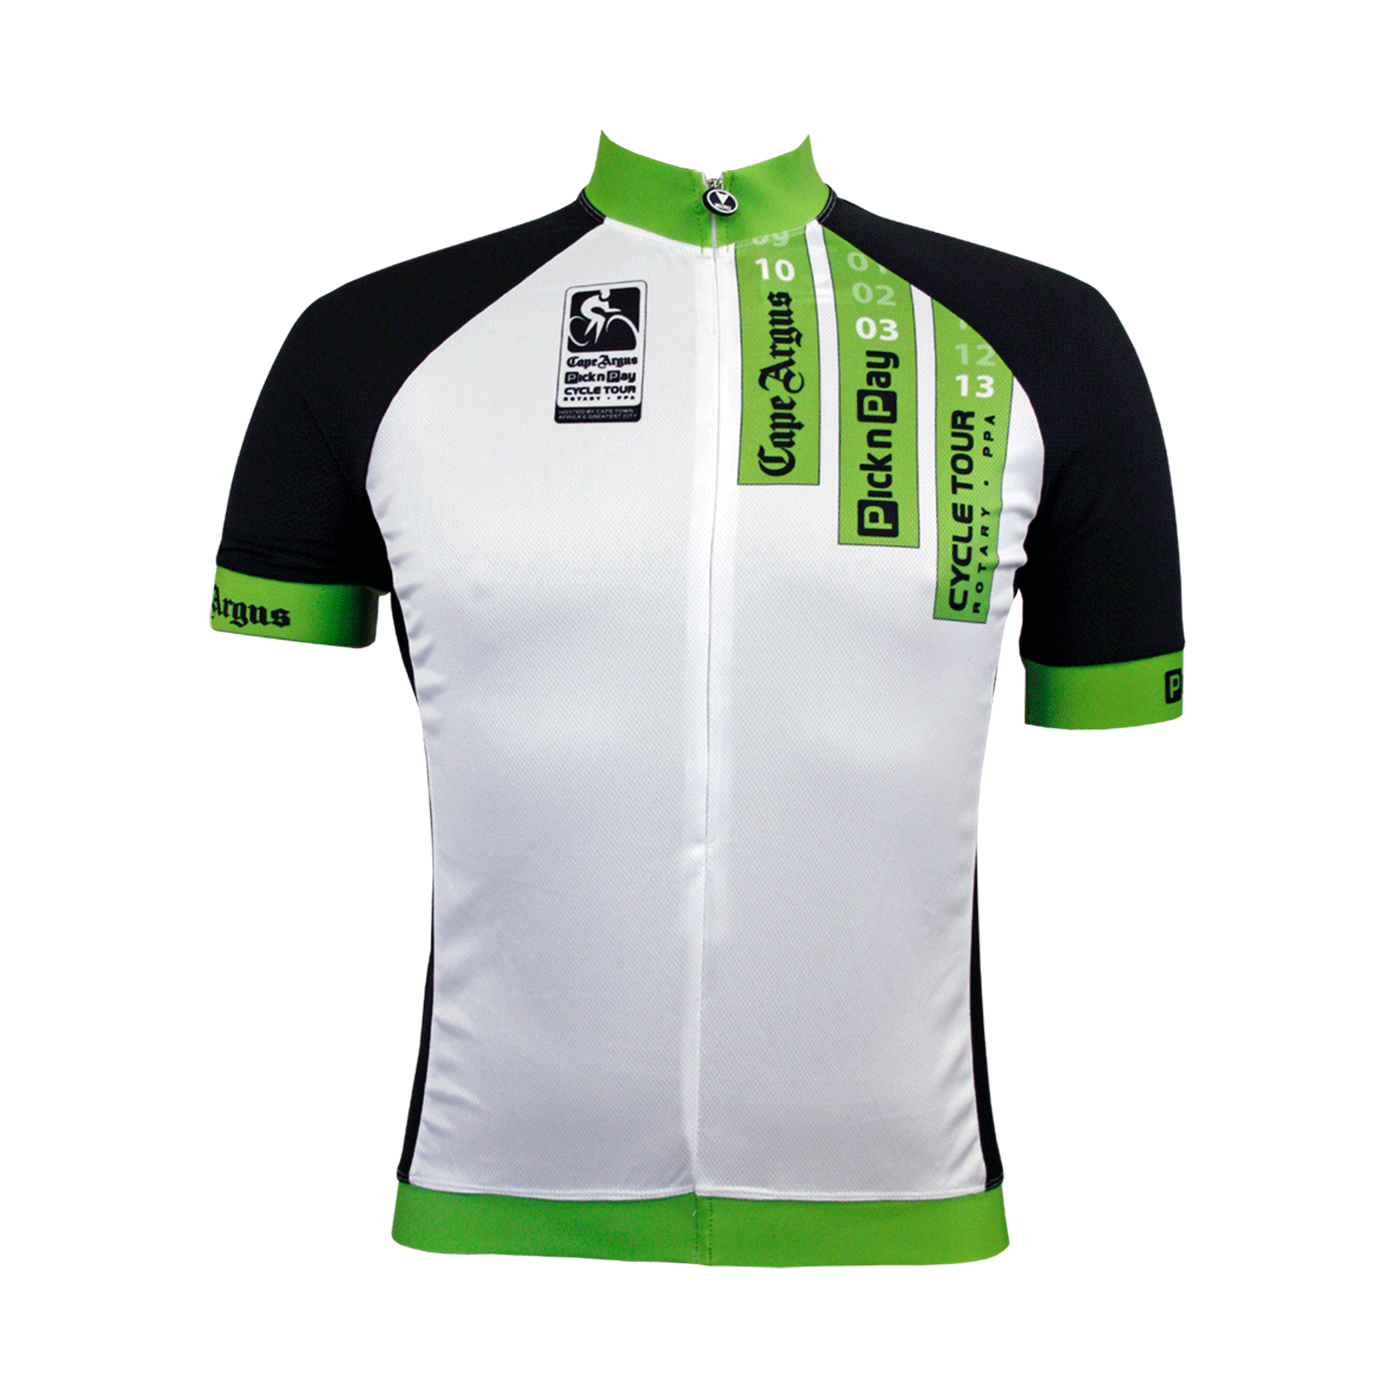 2013 Cycle Tour Cycling Jersey Mens Vento/PV – Velotex